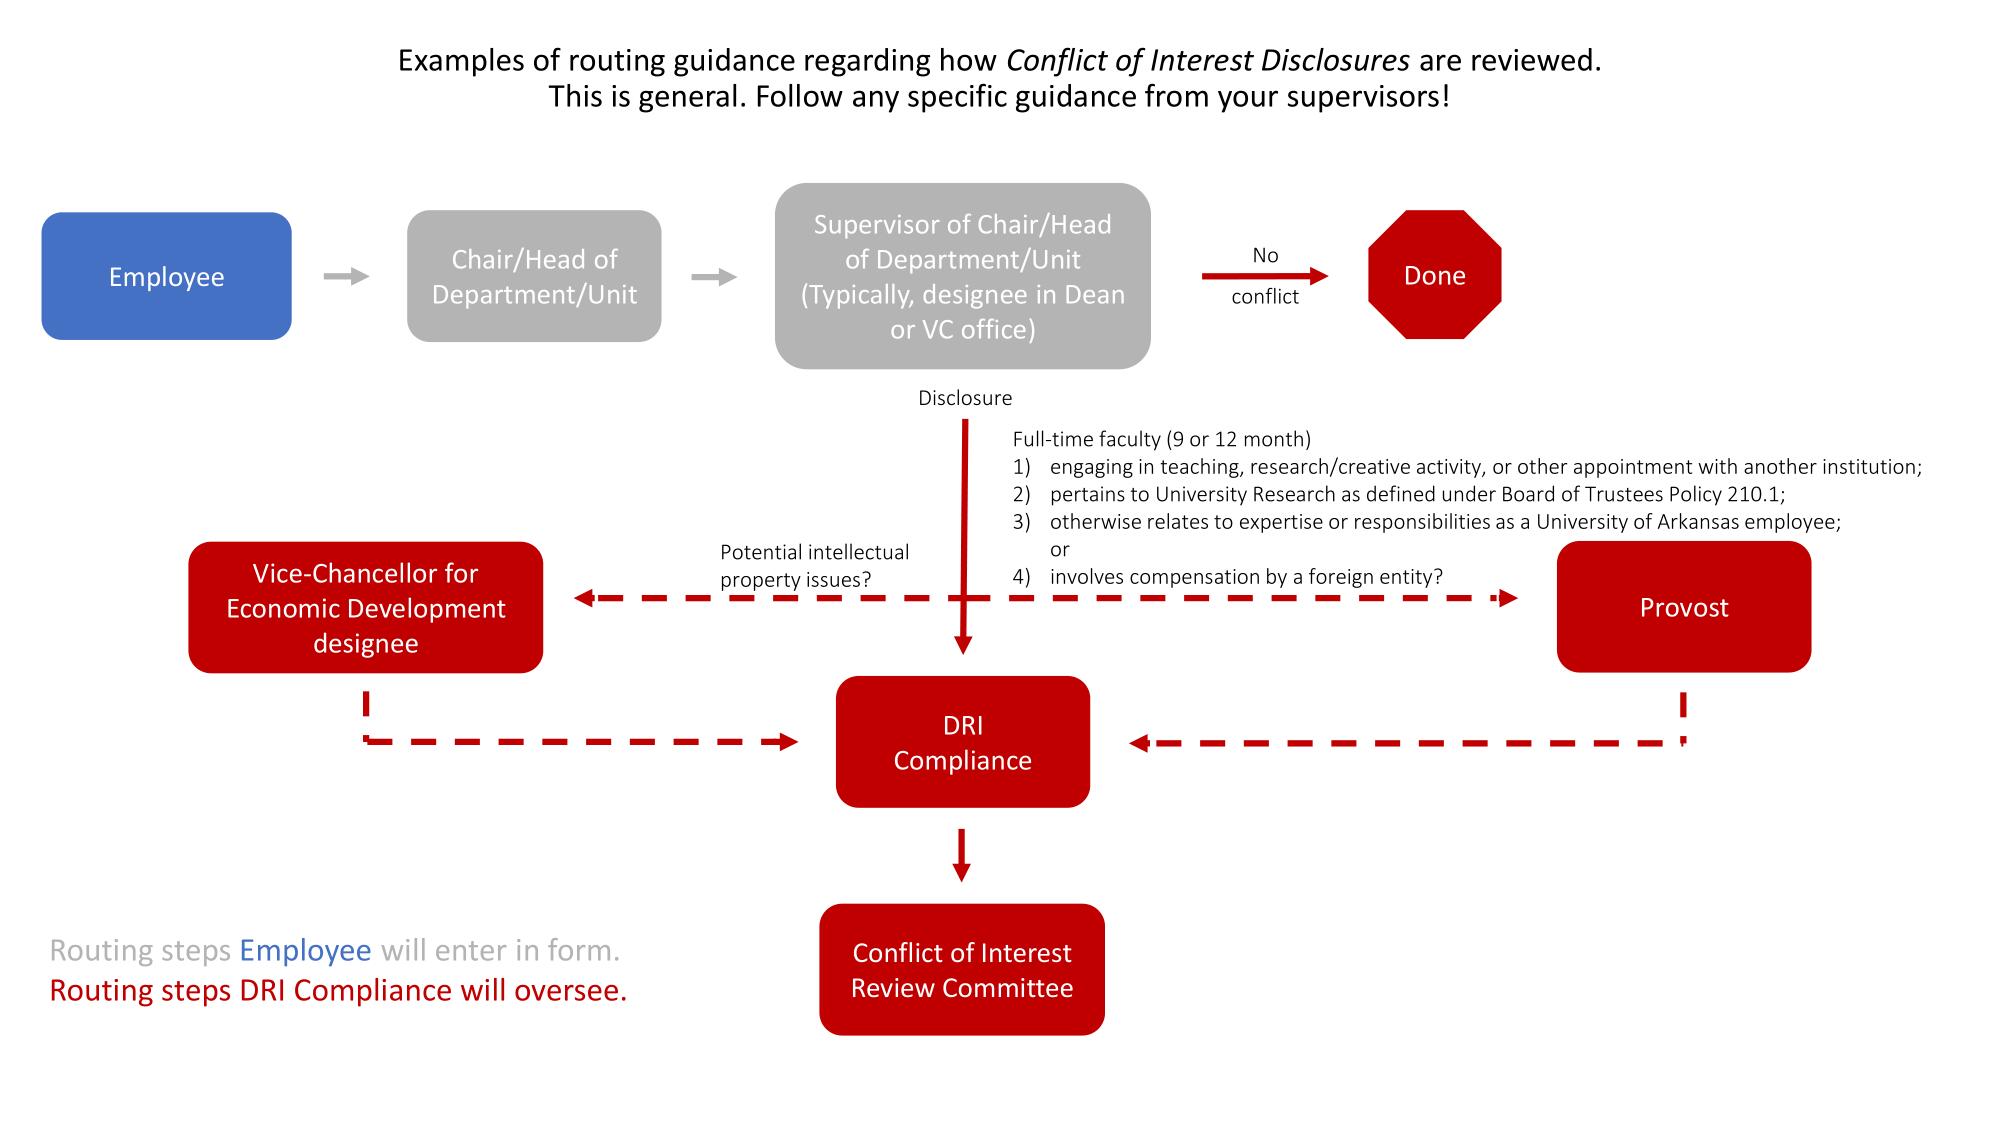 Examples of routing guidance for conflict of interest disclosures for employees below head of department